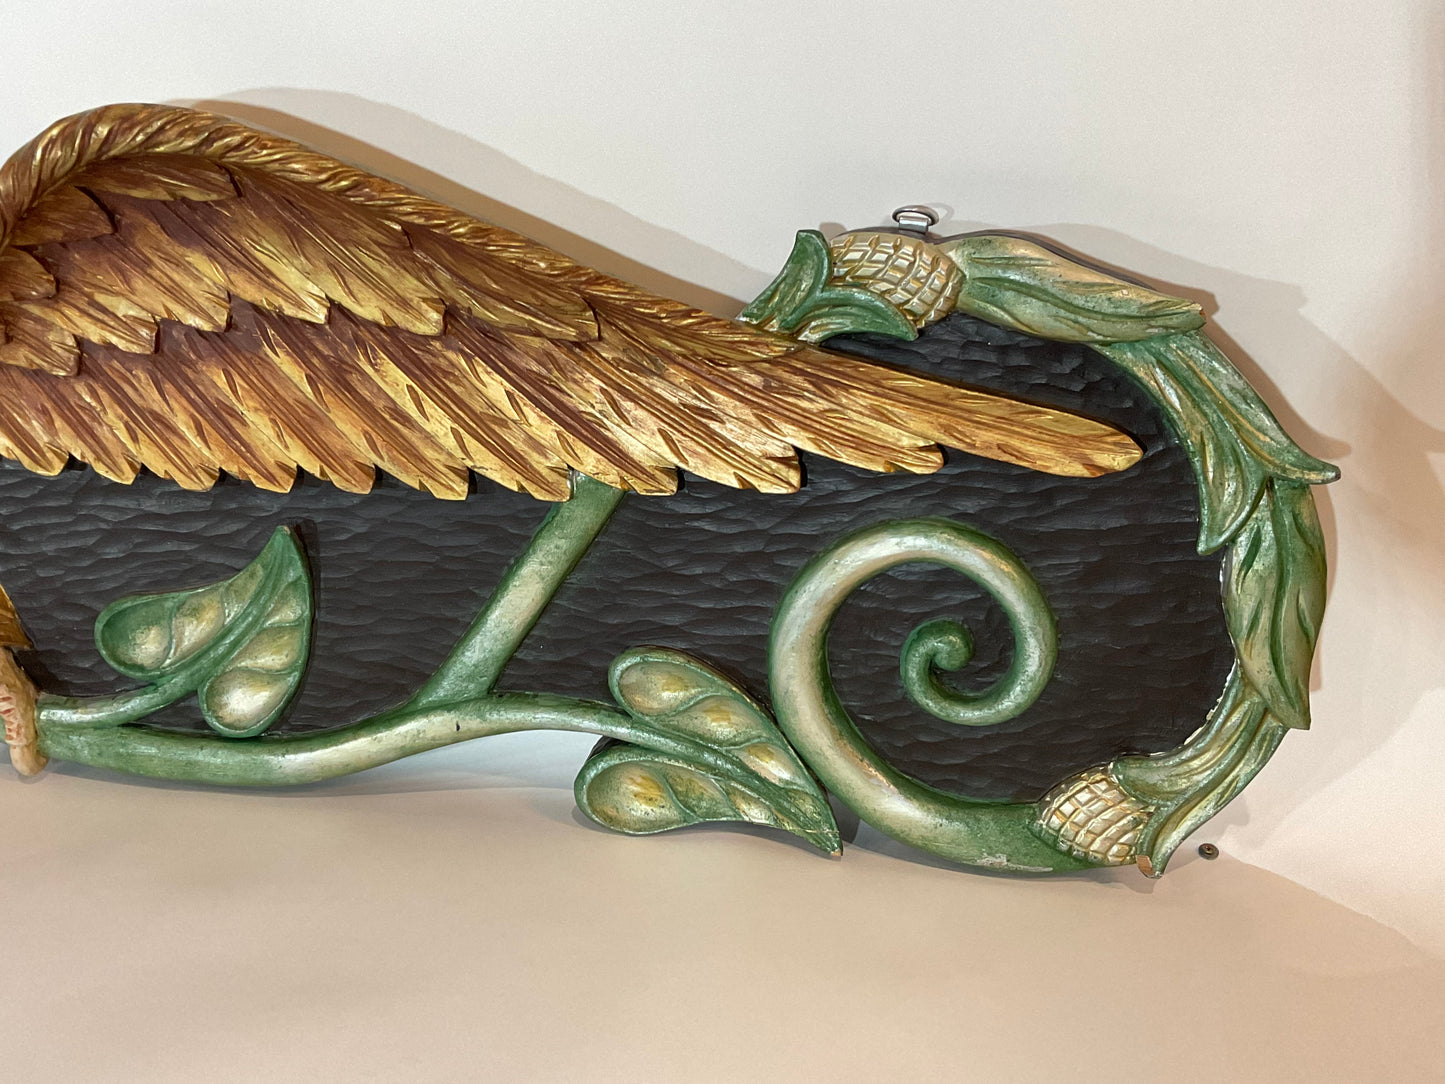 Carved Eagle by Simmons of Rockland Maine - Lannan Gallery